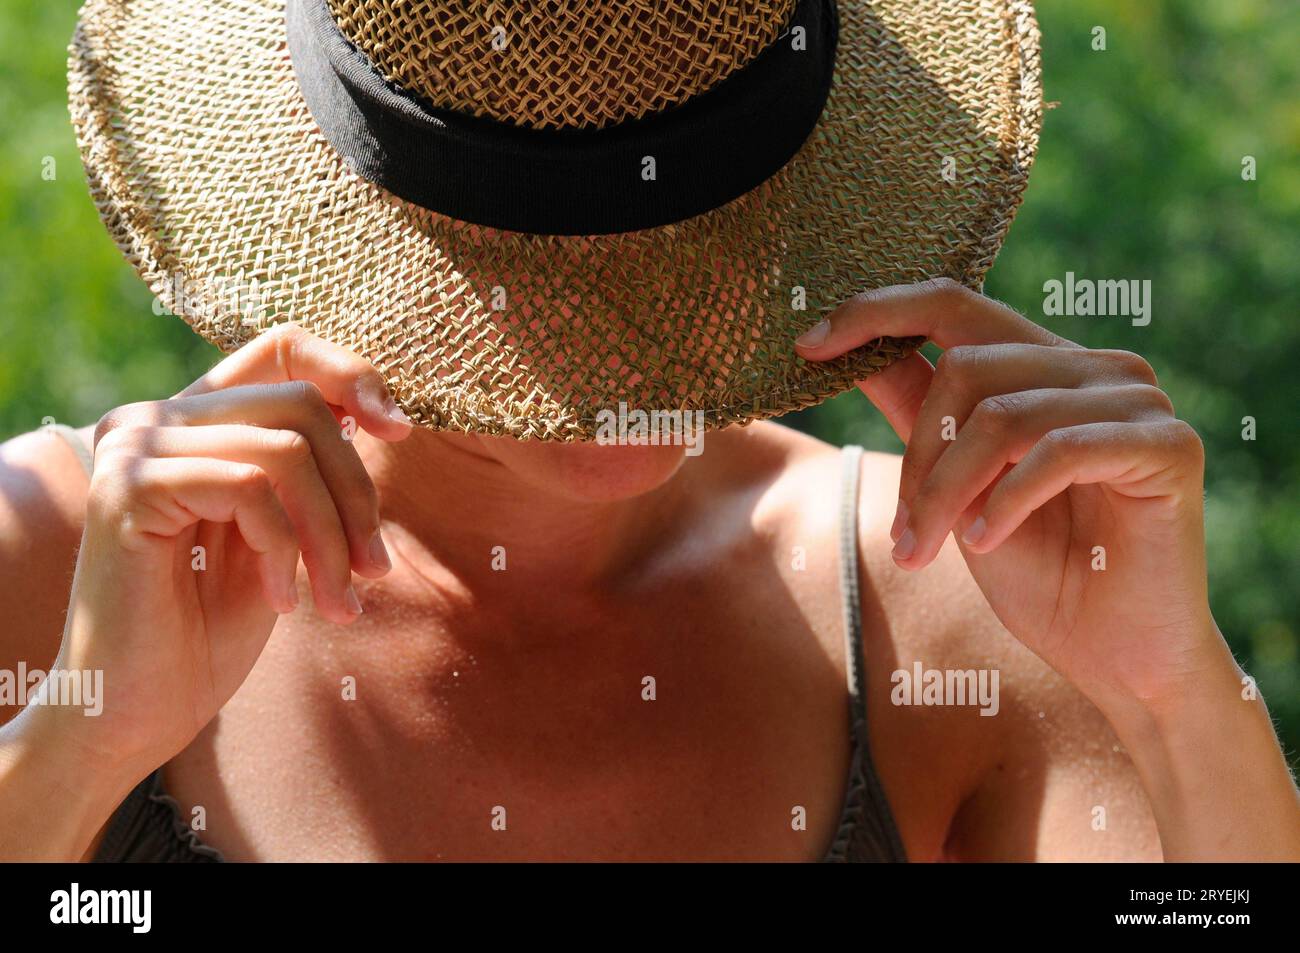 Wearing hat for sun protection Stock Photo